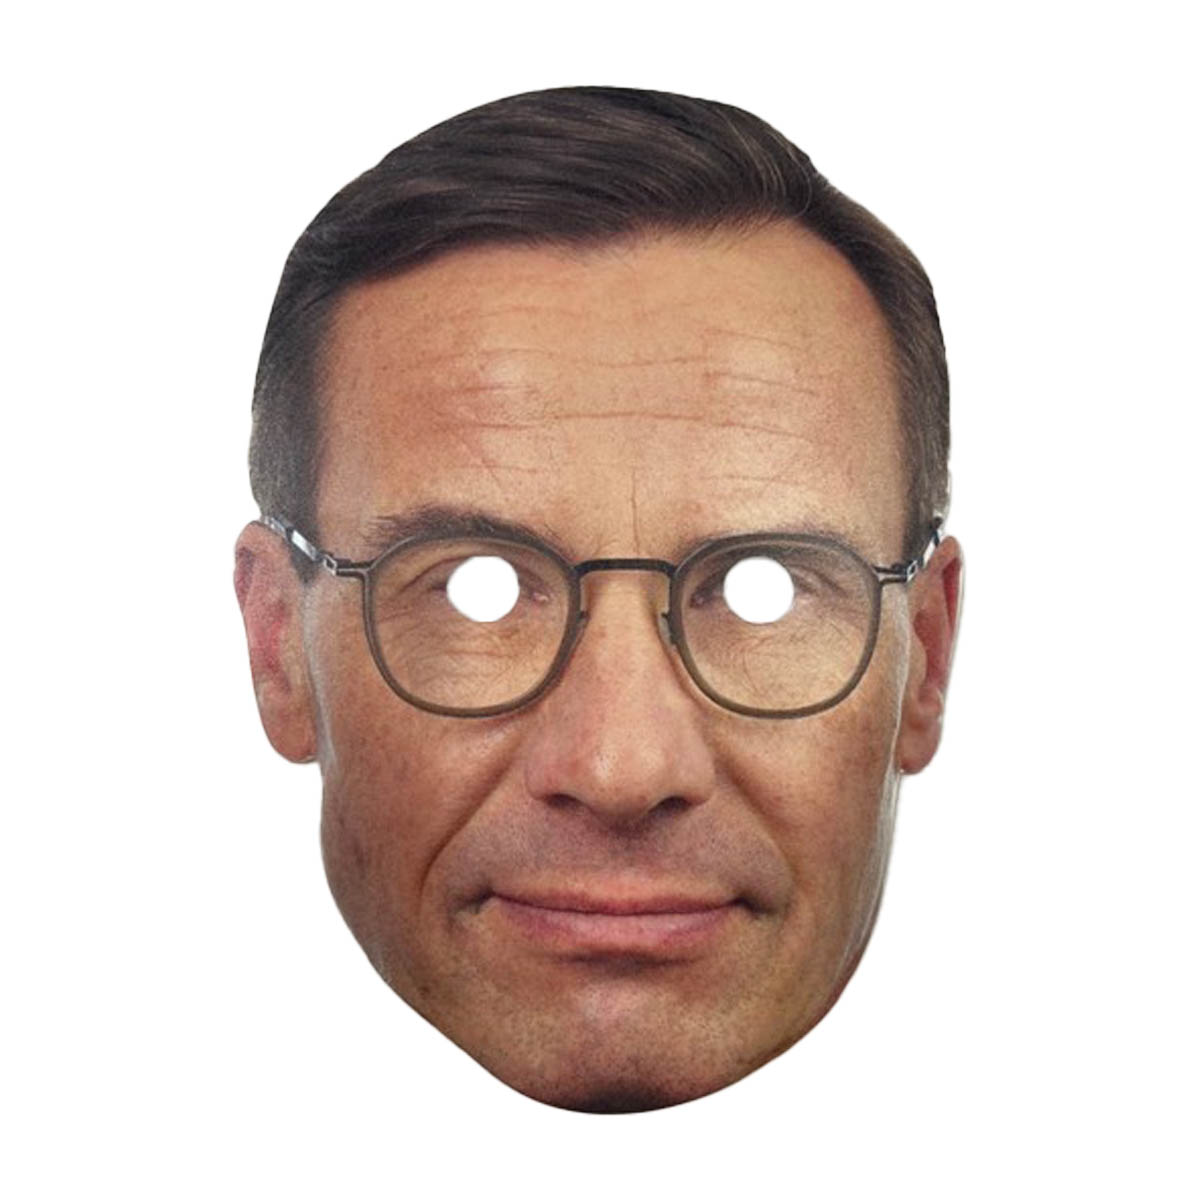 Pappmask, Ulf Kristersson